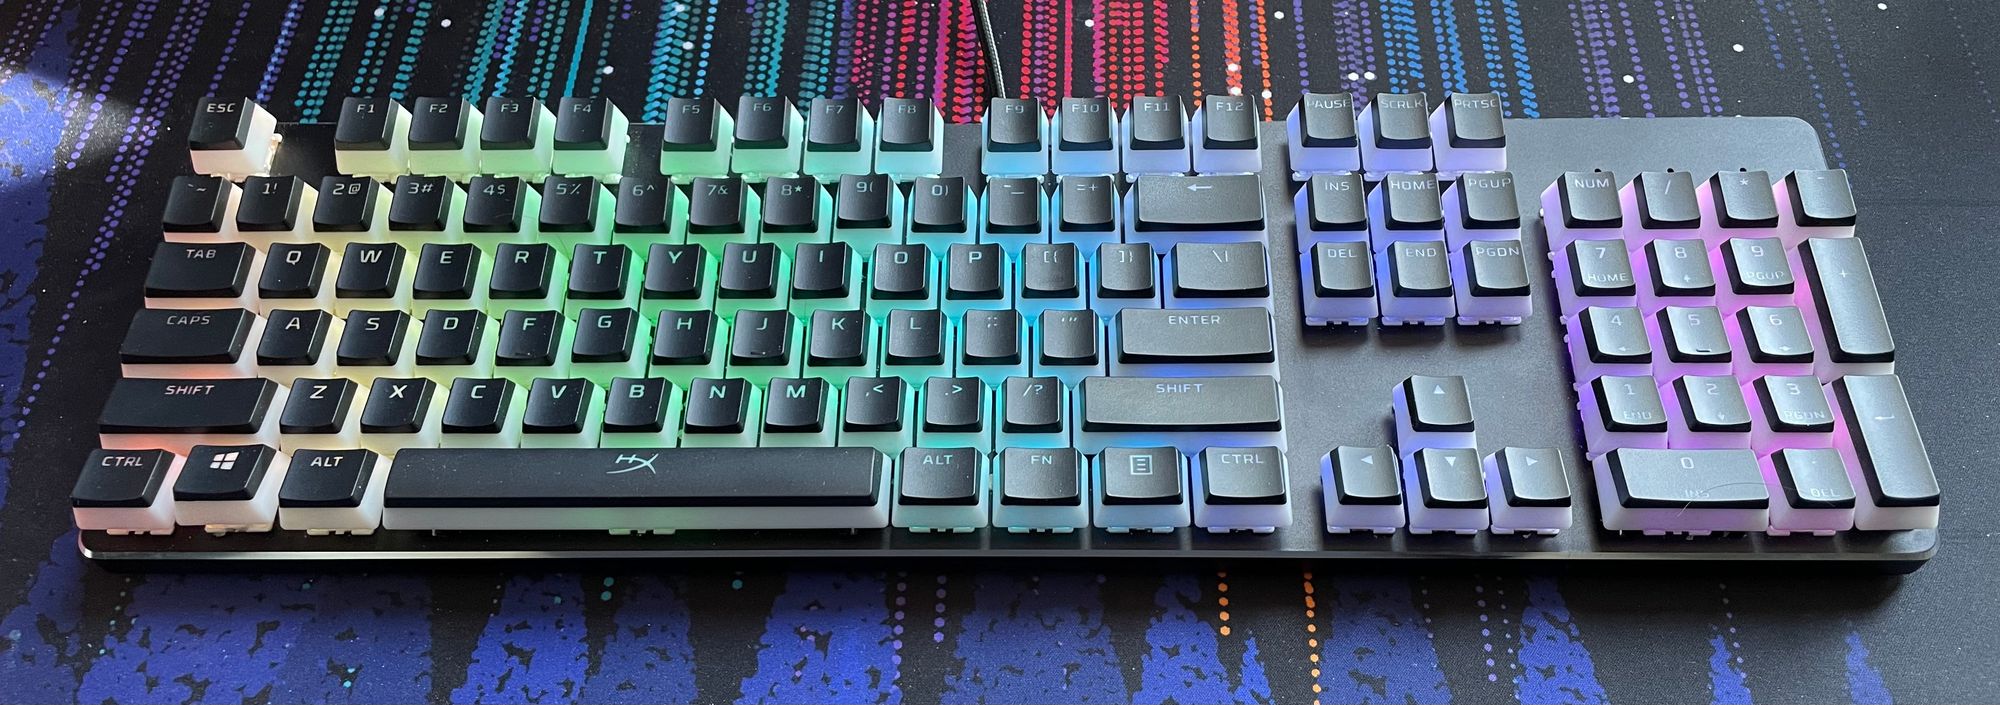 A Simple Introduction to the Infinite World of Mechanical Keyboard